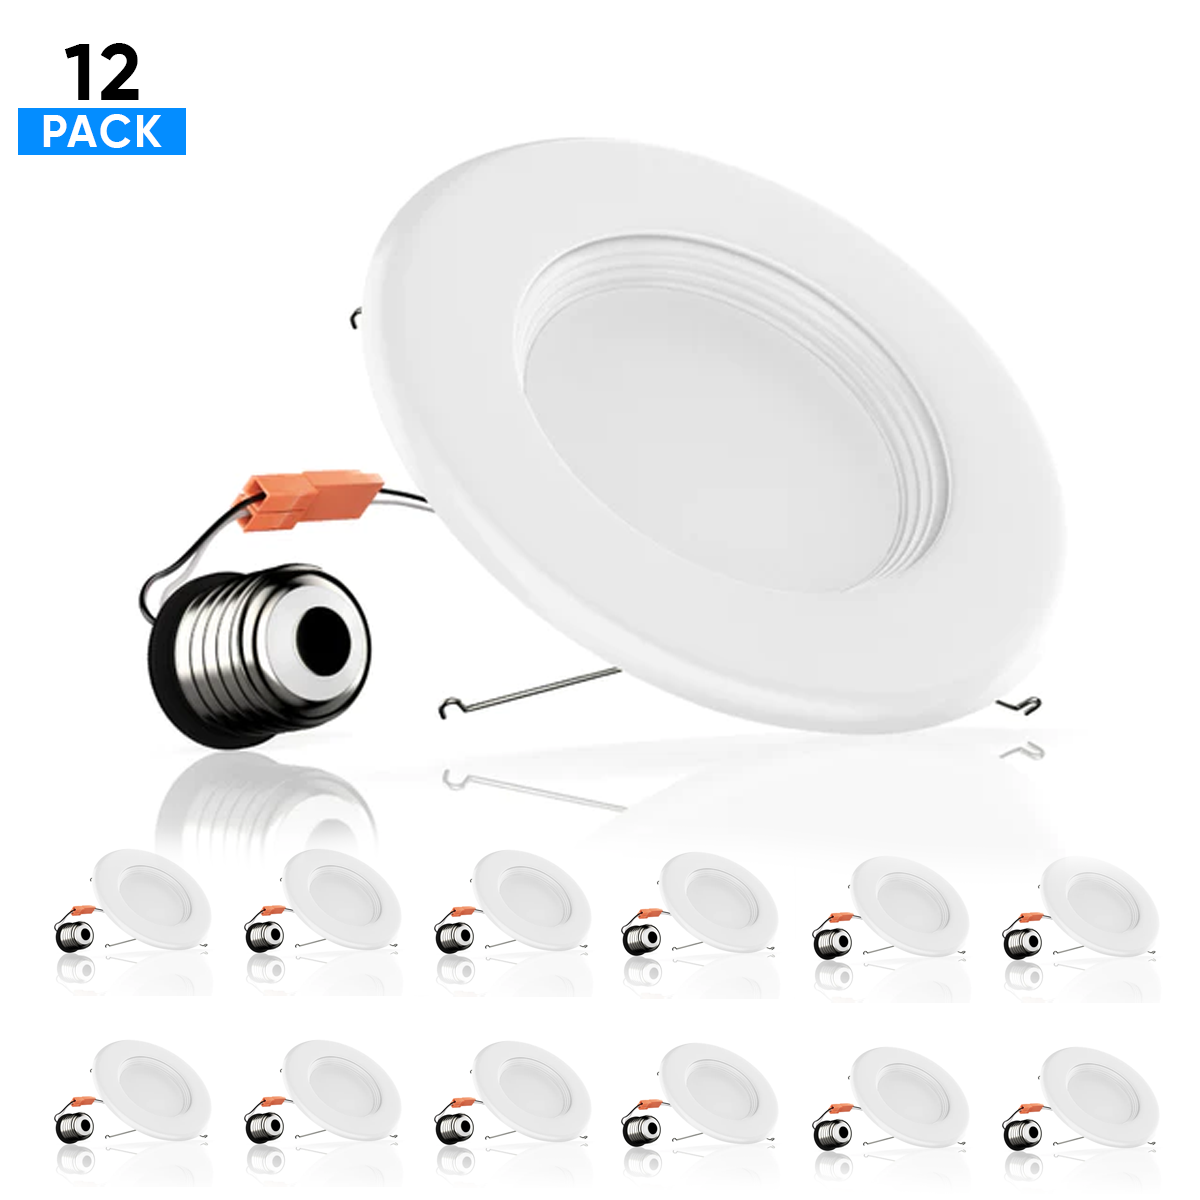 5 in. and 6 in. Recessed LED Downlight, 15W, 1100LM, Dimmable, Energy Star & ETL, Baffle-trim, Simple Retrofit Installation - LED Can Lights